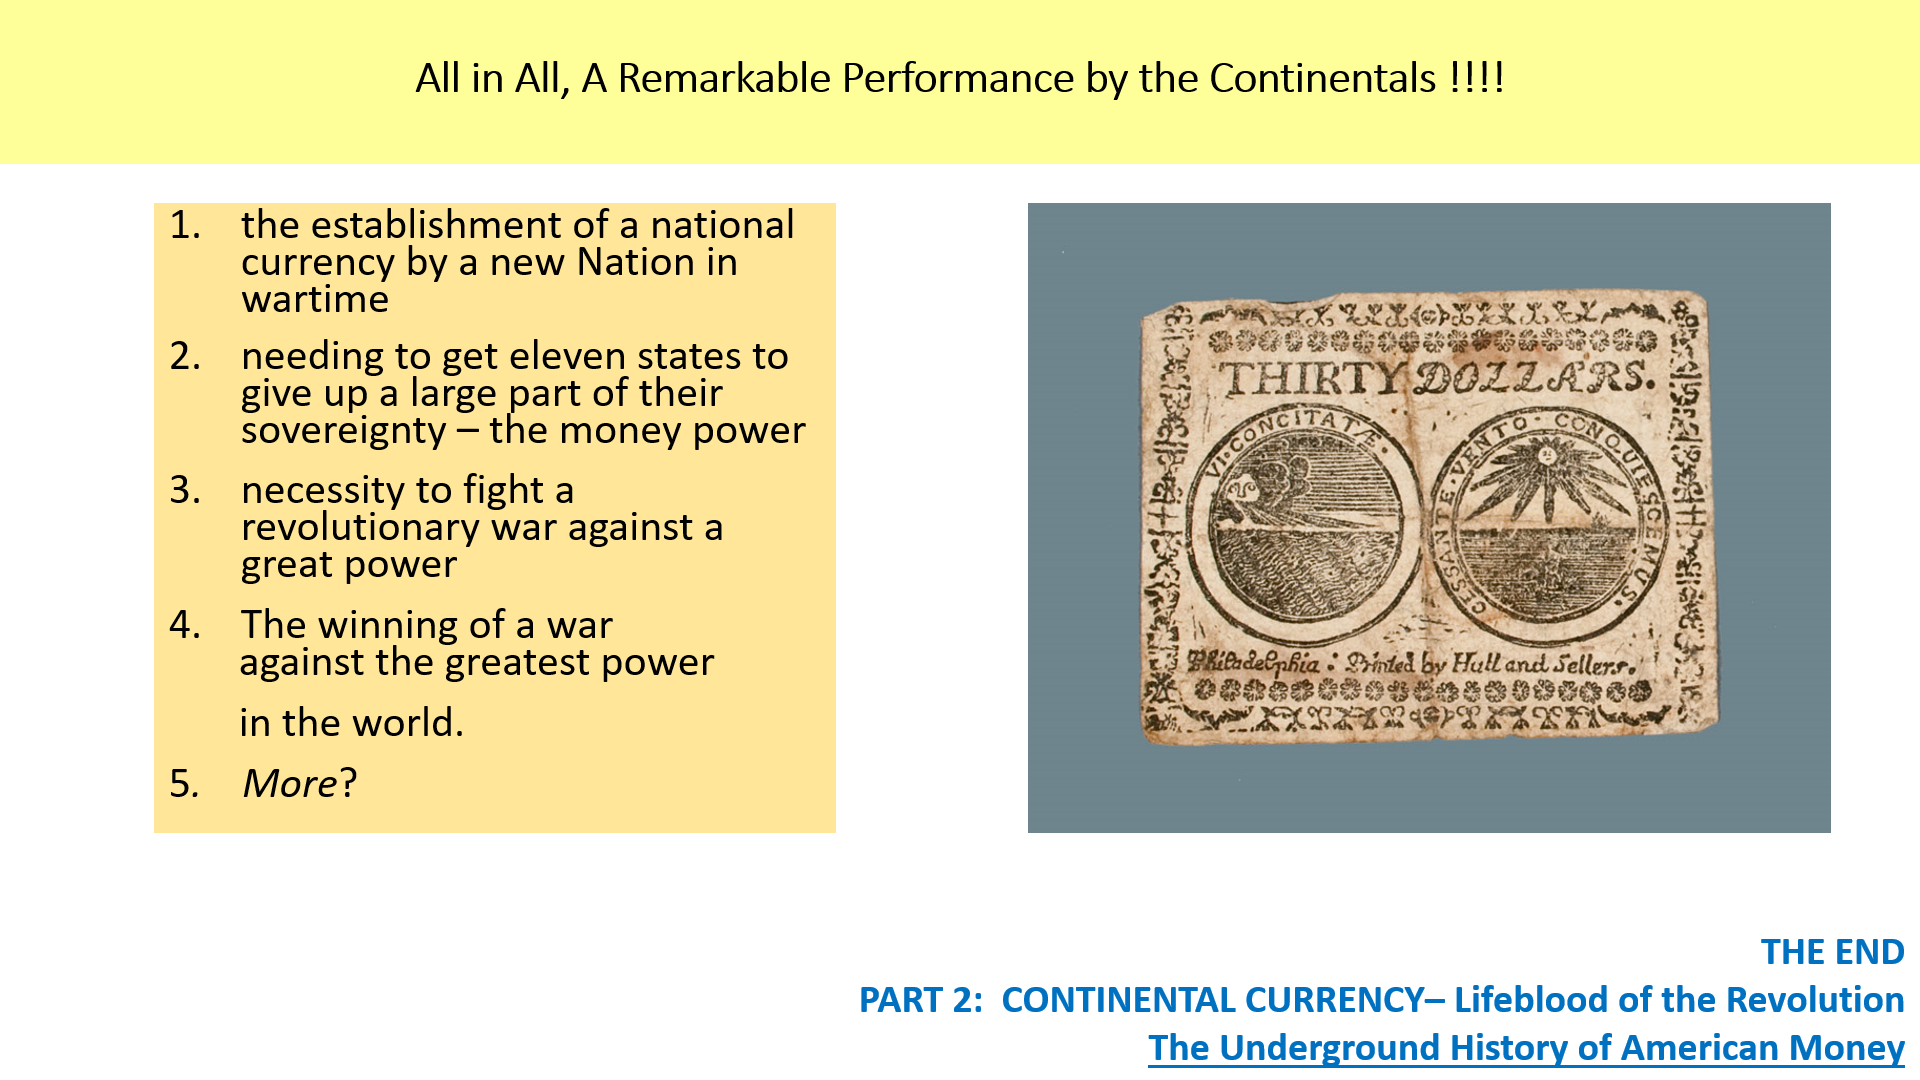 The continental currency was a remarkable performance